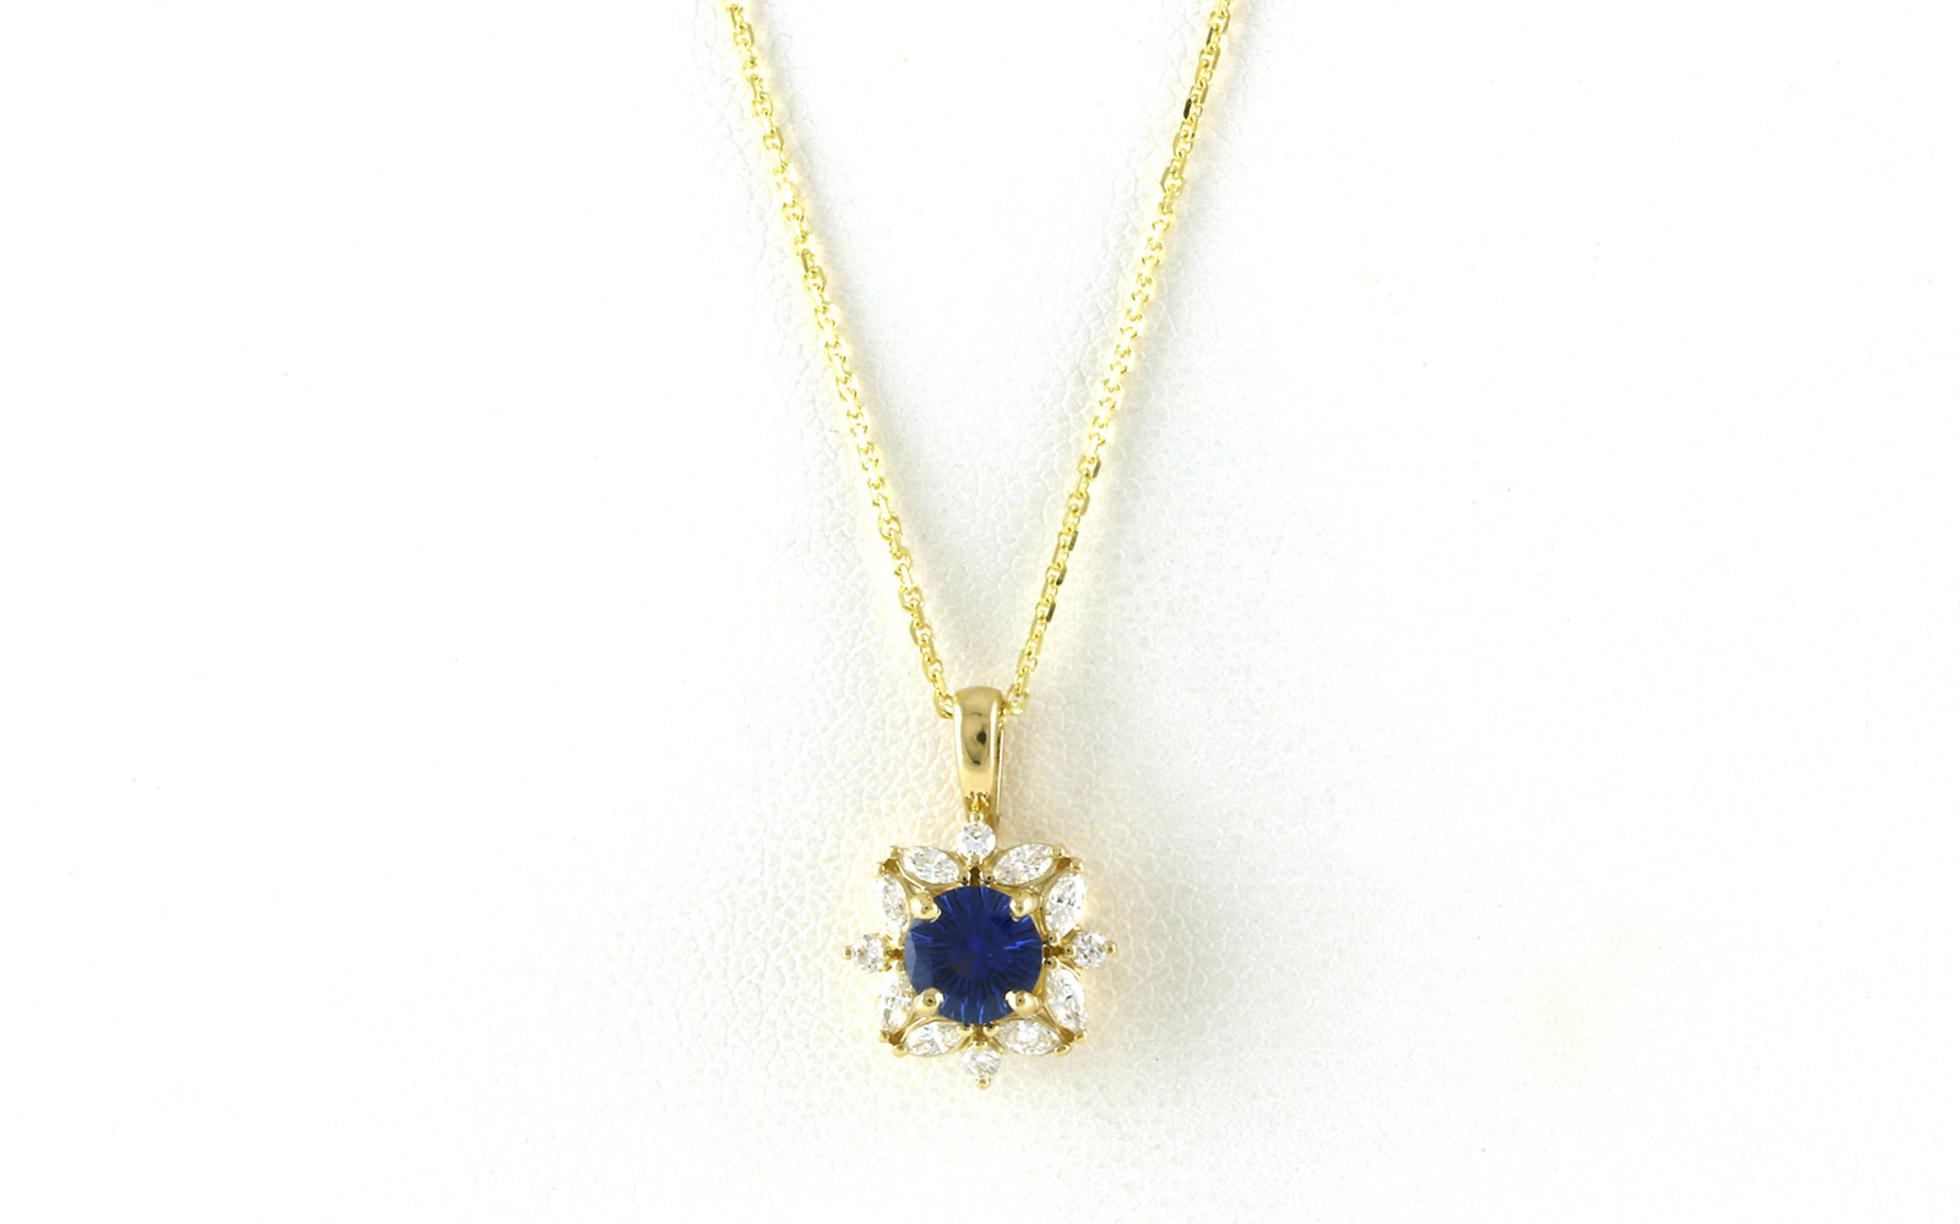 Floral-style Halo Fantasy-cut Montana Yogo Sapphire and Diamond Necklace in Yellow Gold (0.88cts TWT)